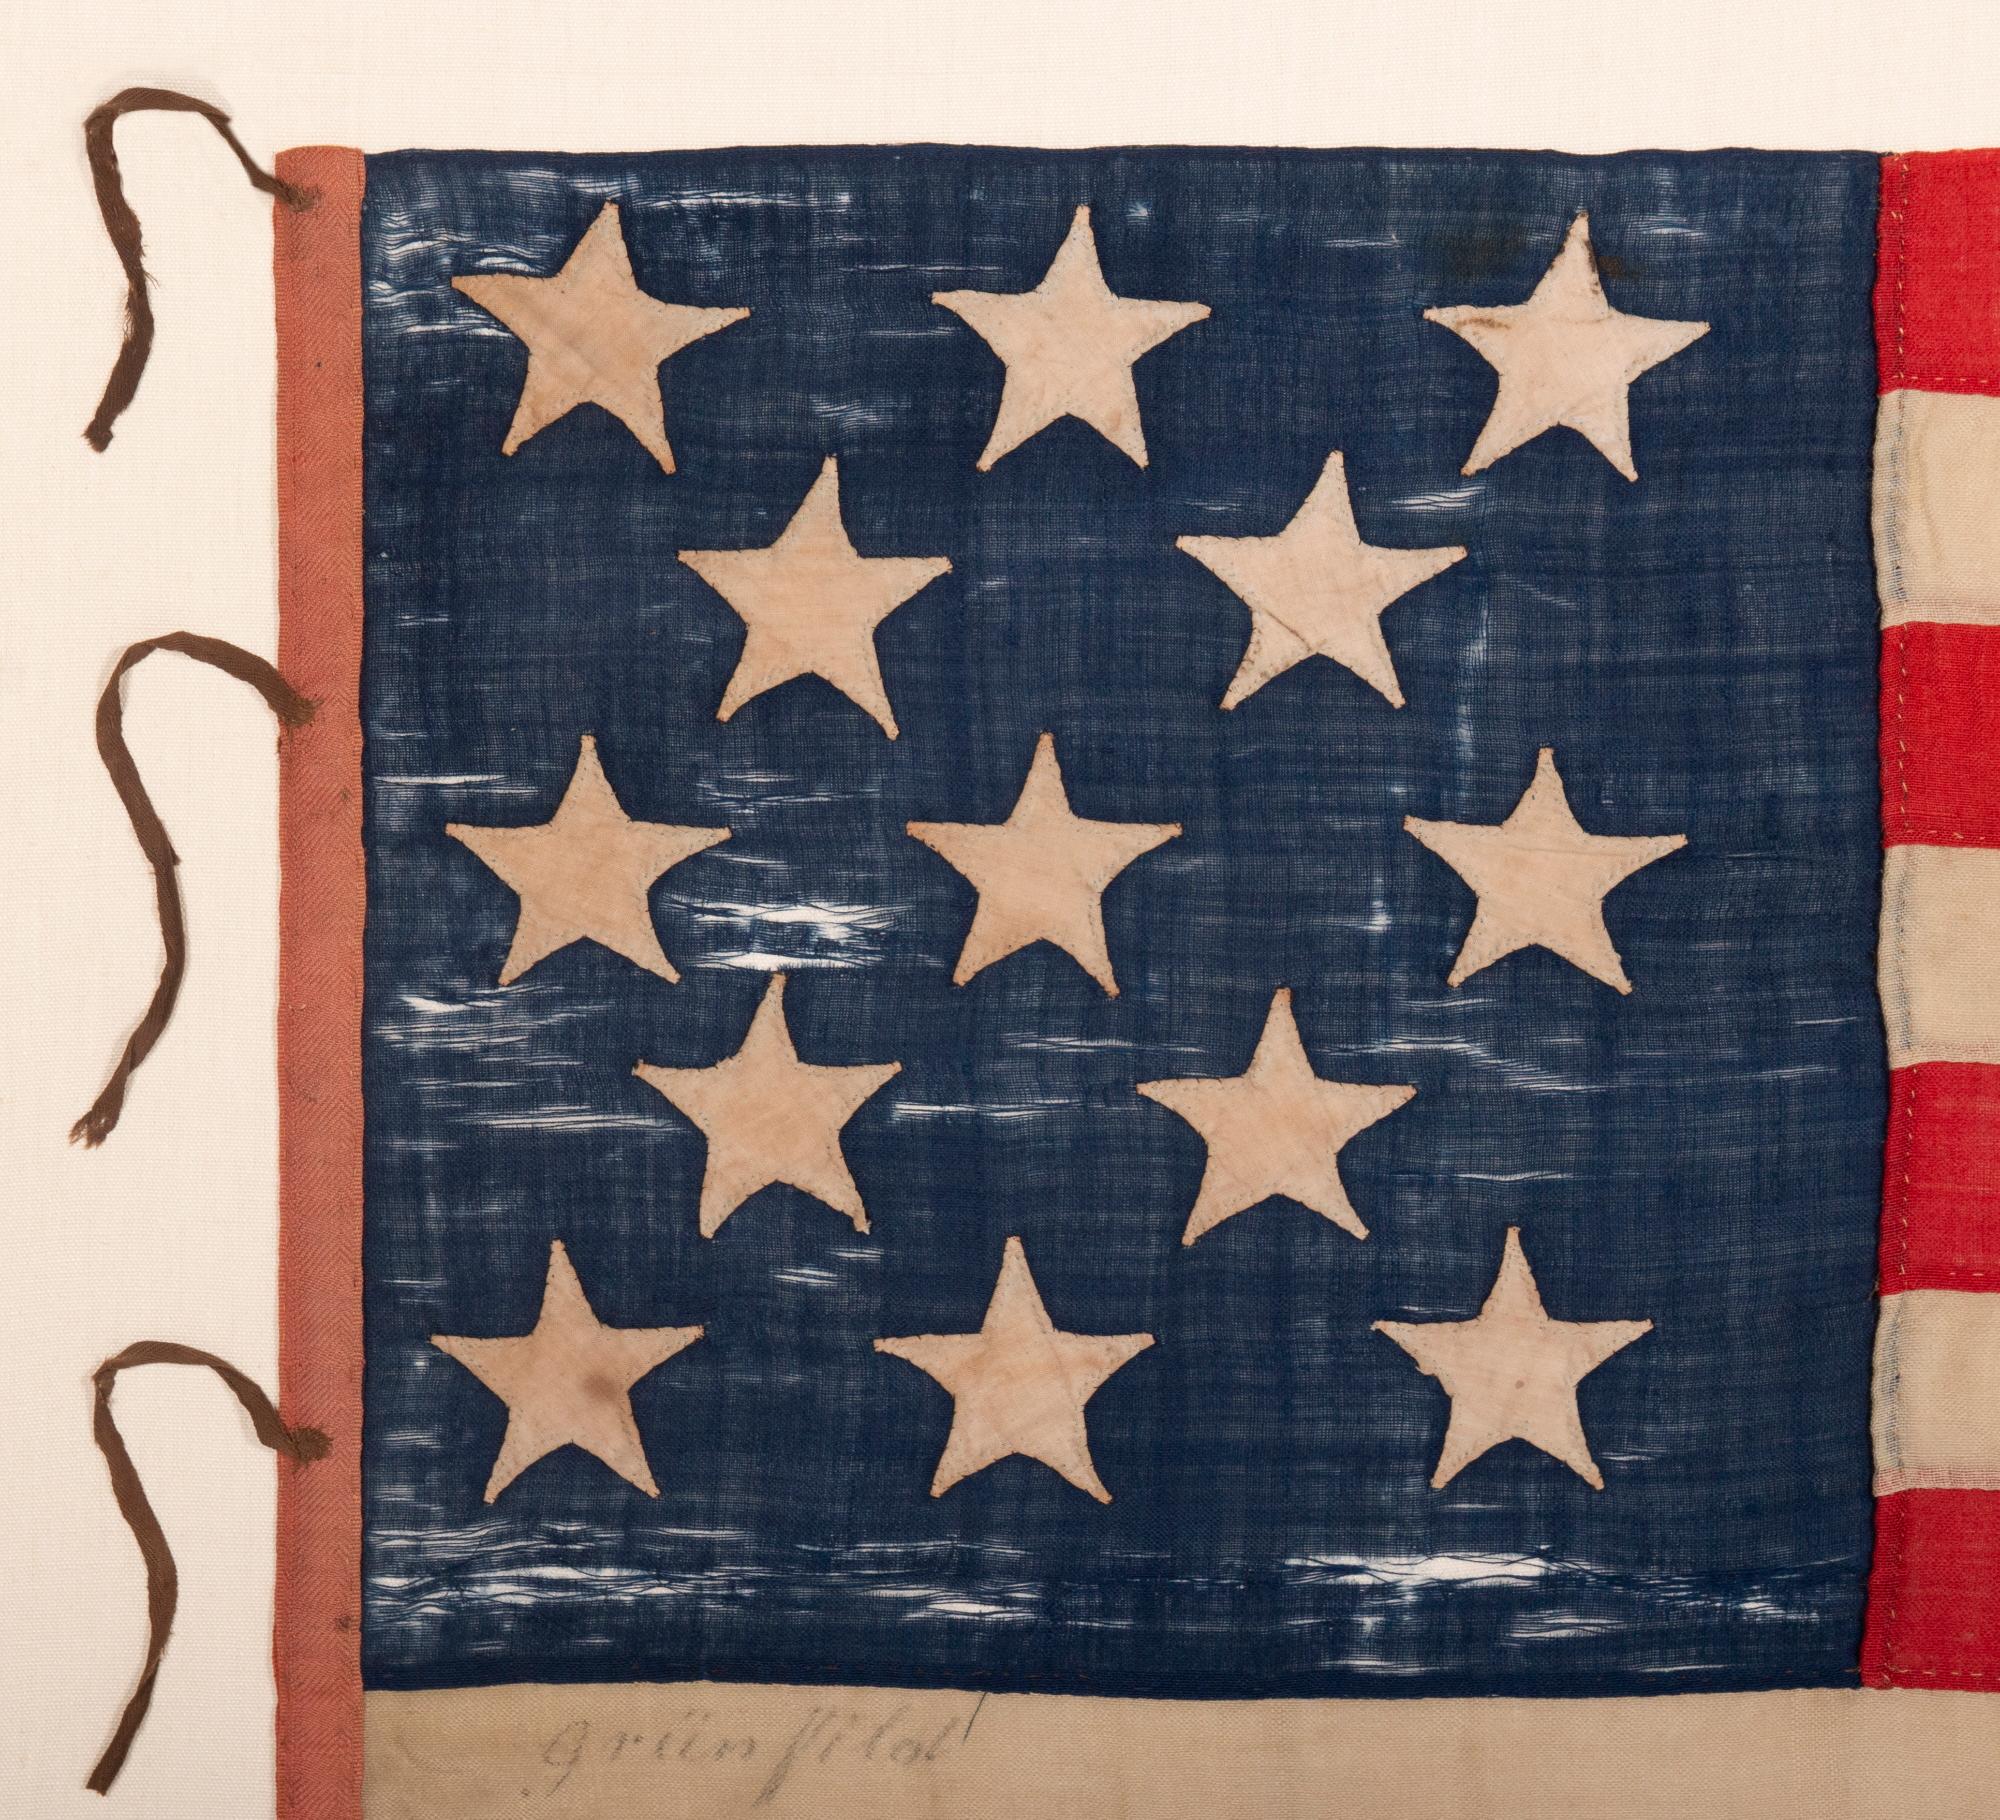 ENTIRELY HAND-SEWN ANTIQUE AMERICAN FLAG OF THE CIVIL WAR ERA, WITH 13 SINGLE-APPLIQUÉD STARS IN A 3-2-3-2-3 CONFIGURATION, IN A GREAT, SMALL SCALE AMONG ITS COUNTERPARTS, PROBABLY MADE IN NEW YORK CITY, SIGNED “GRÜNFILD”

13 star flags have been